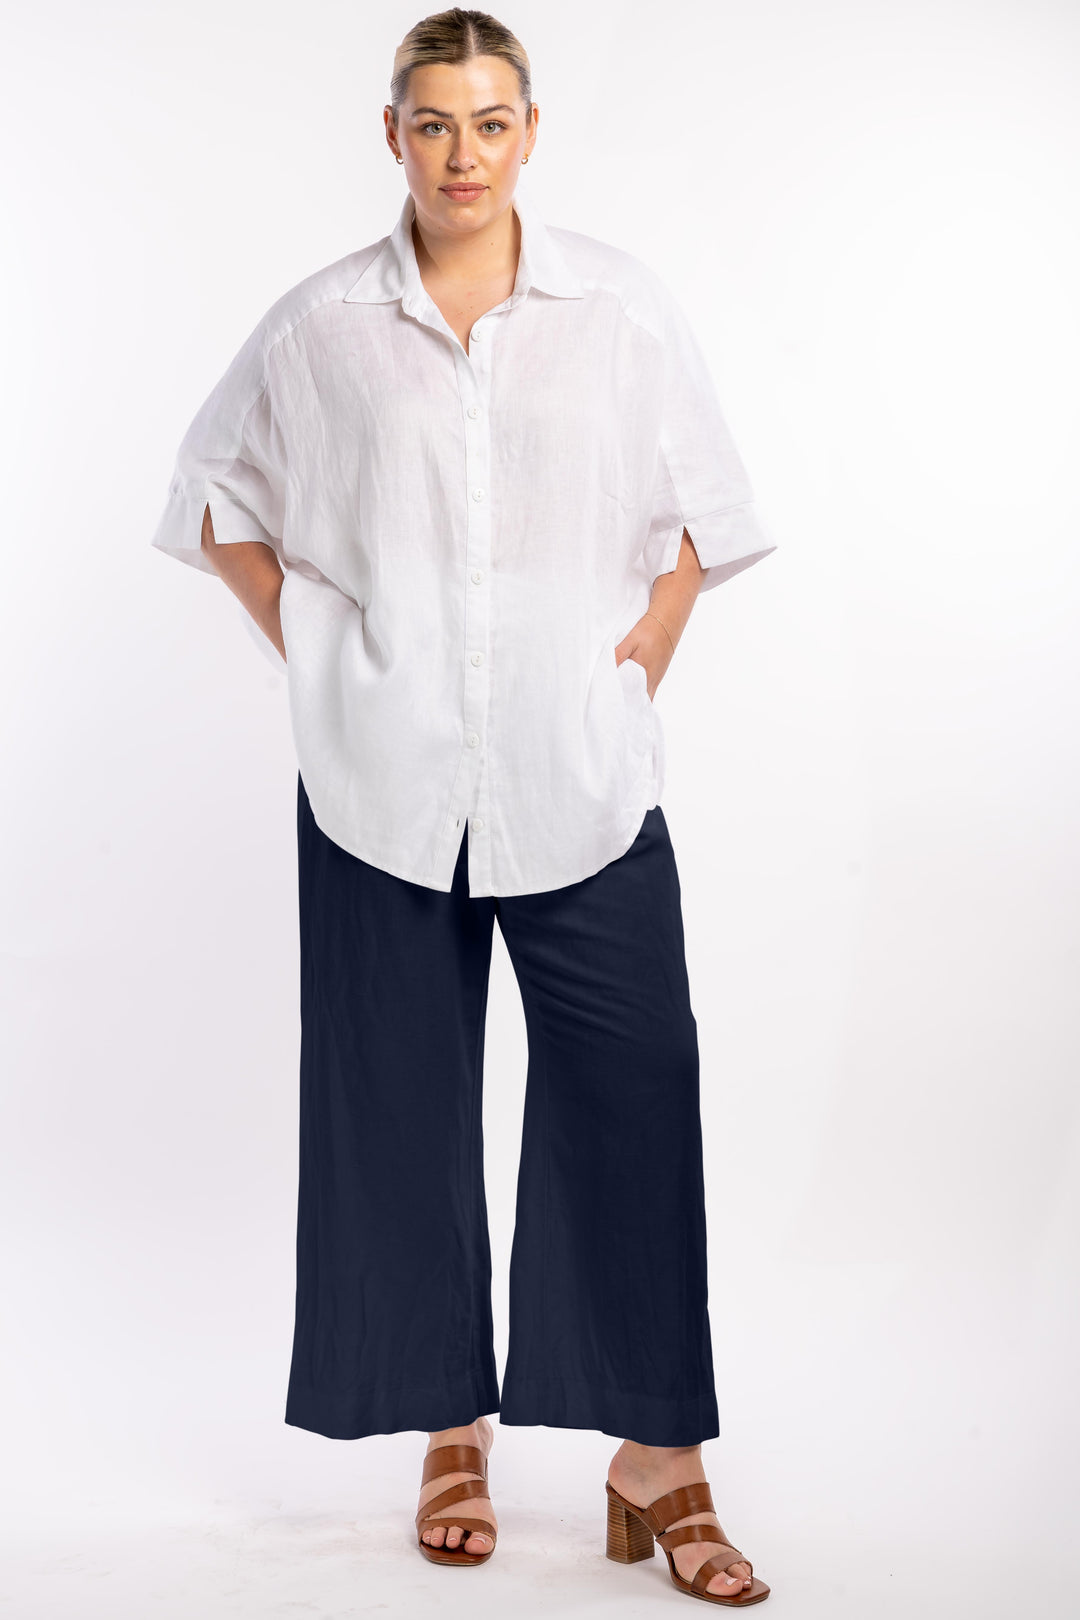 Here Comes The Sun Wide Leg Linen Pant - Navy